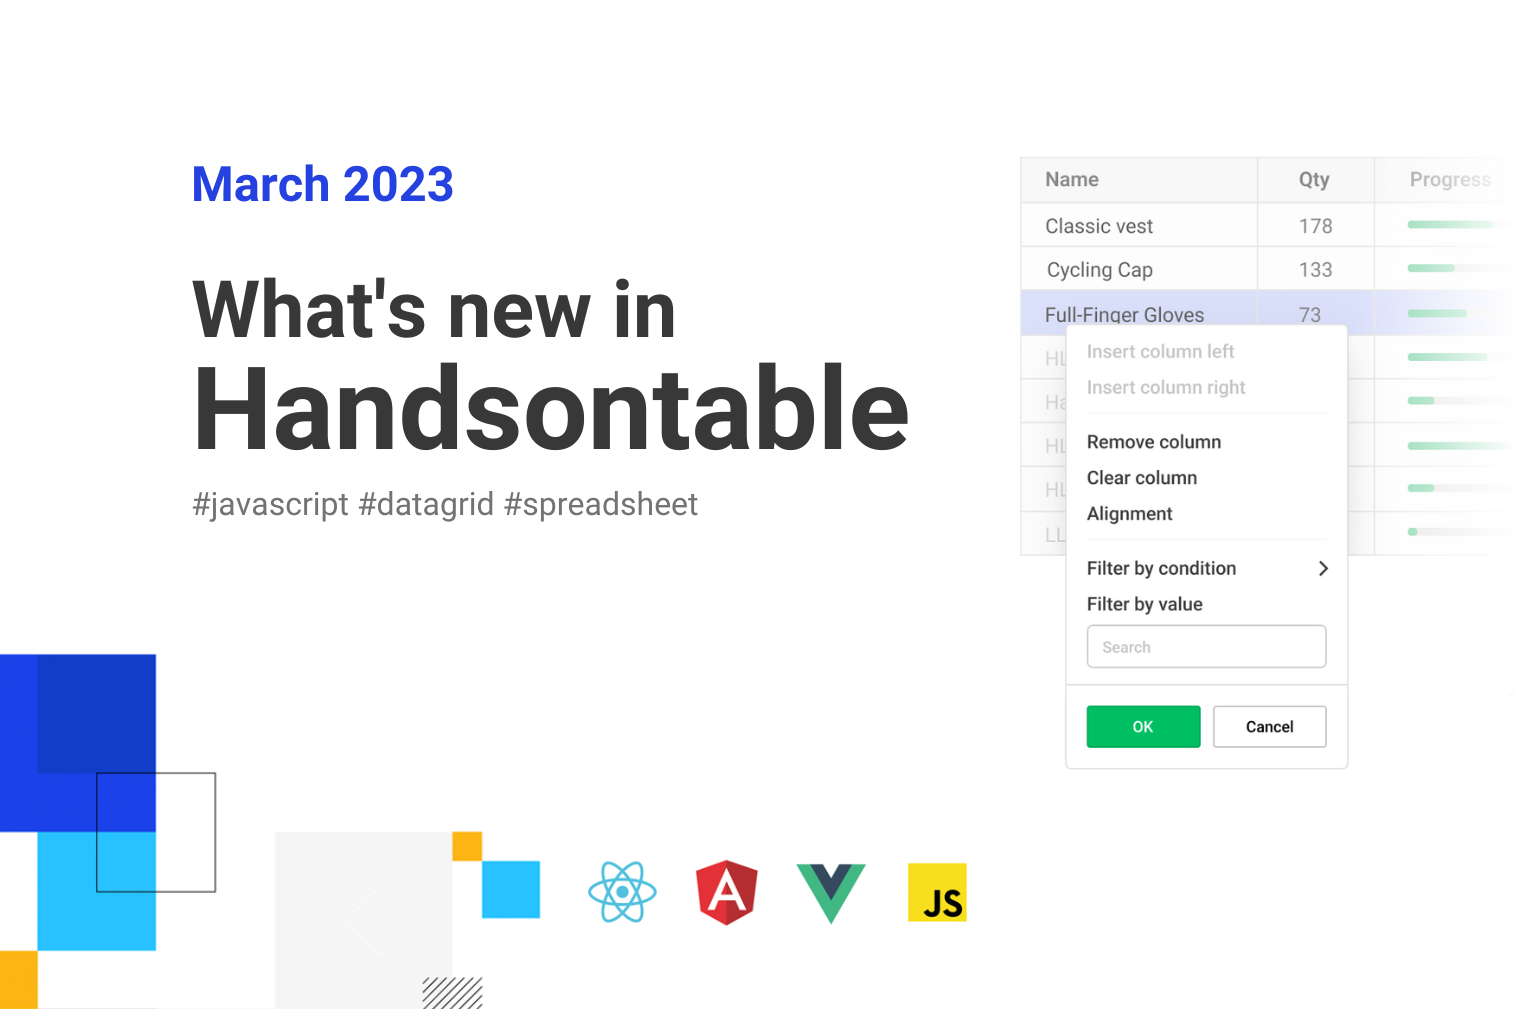 What’s new in Handsontable: March 2023